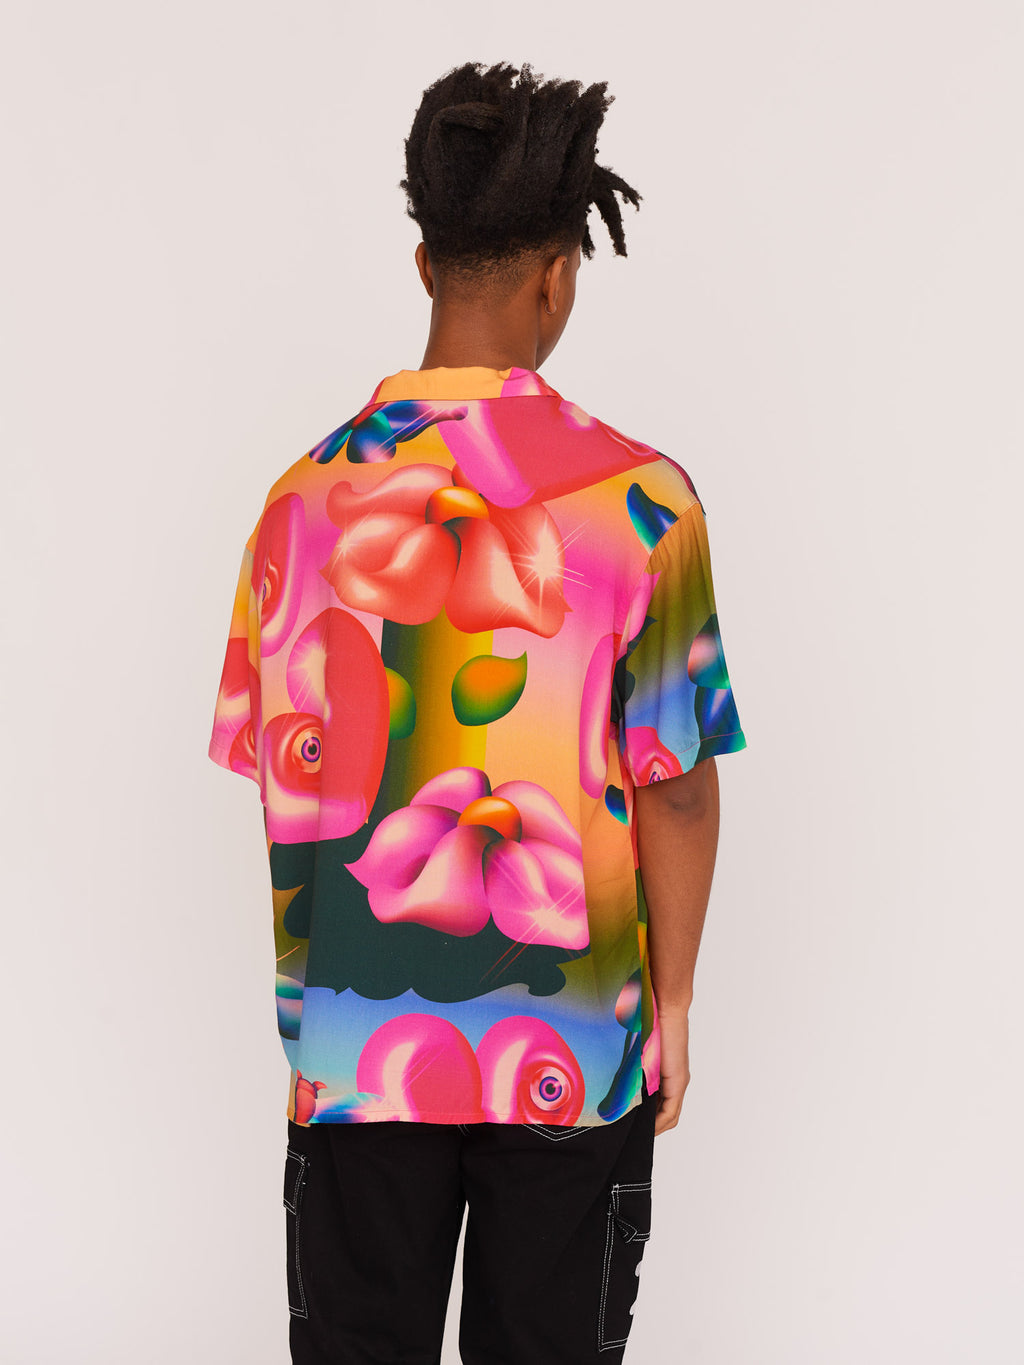 10 Designer Bowling Shirts That Are Right Up Your Alley For Summer 2019